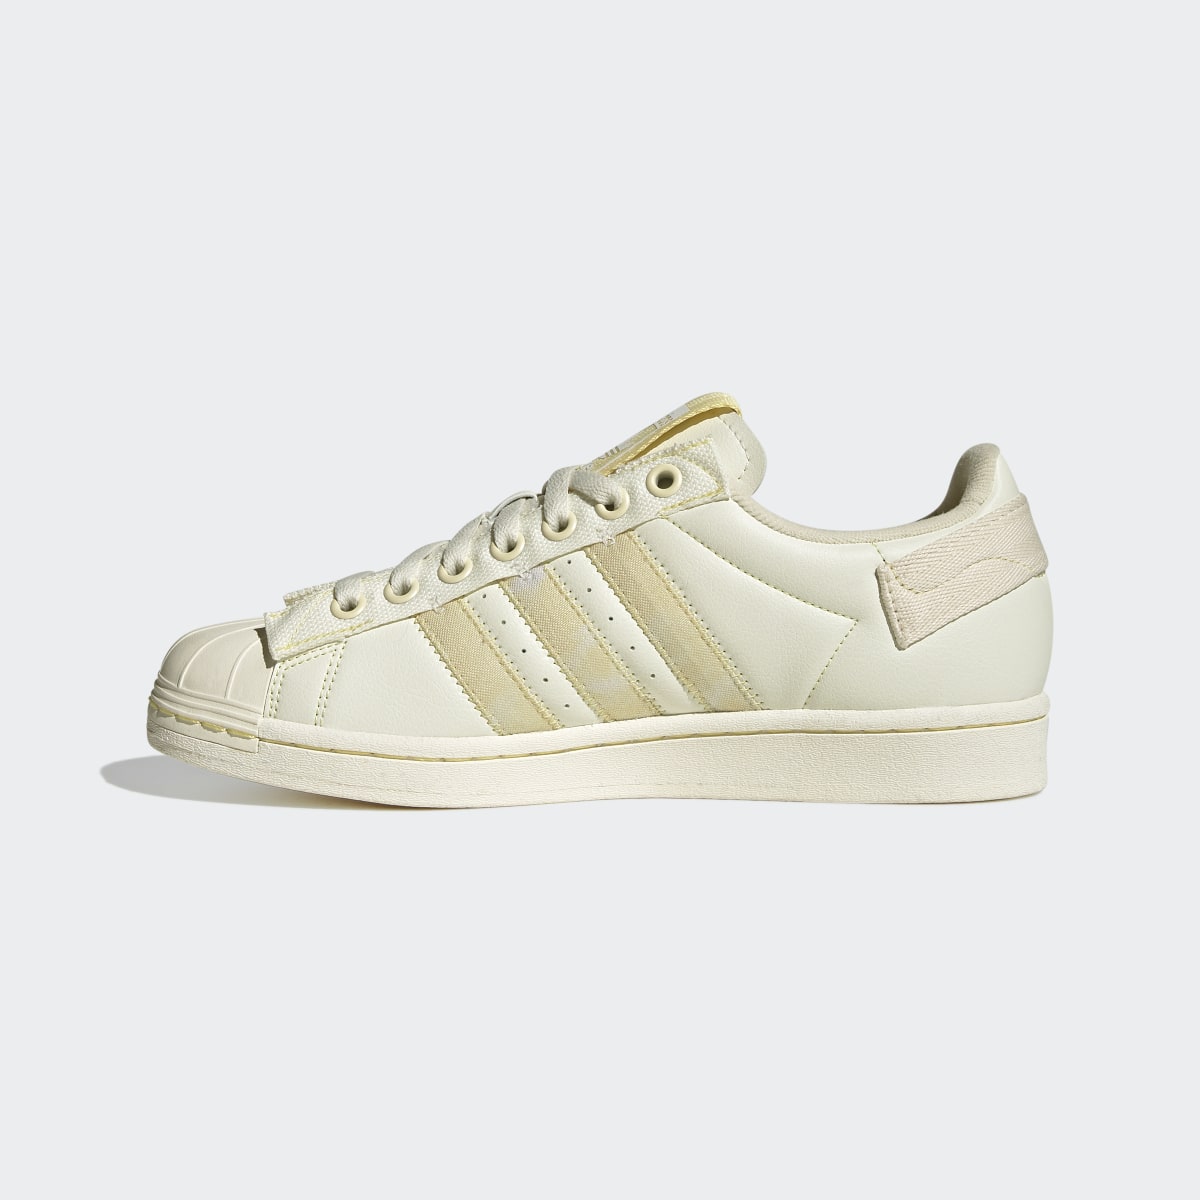 Adidas Superstar Parley Shoes. 10